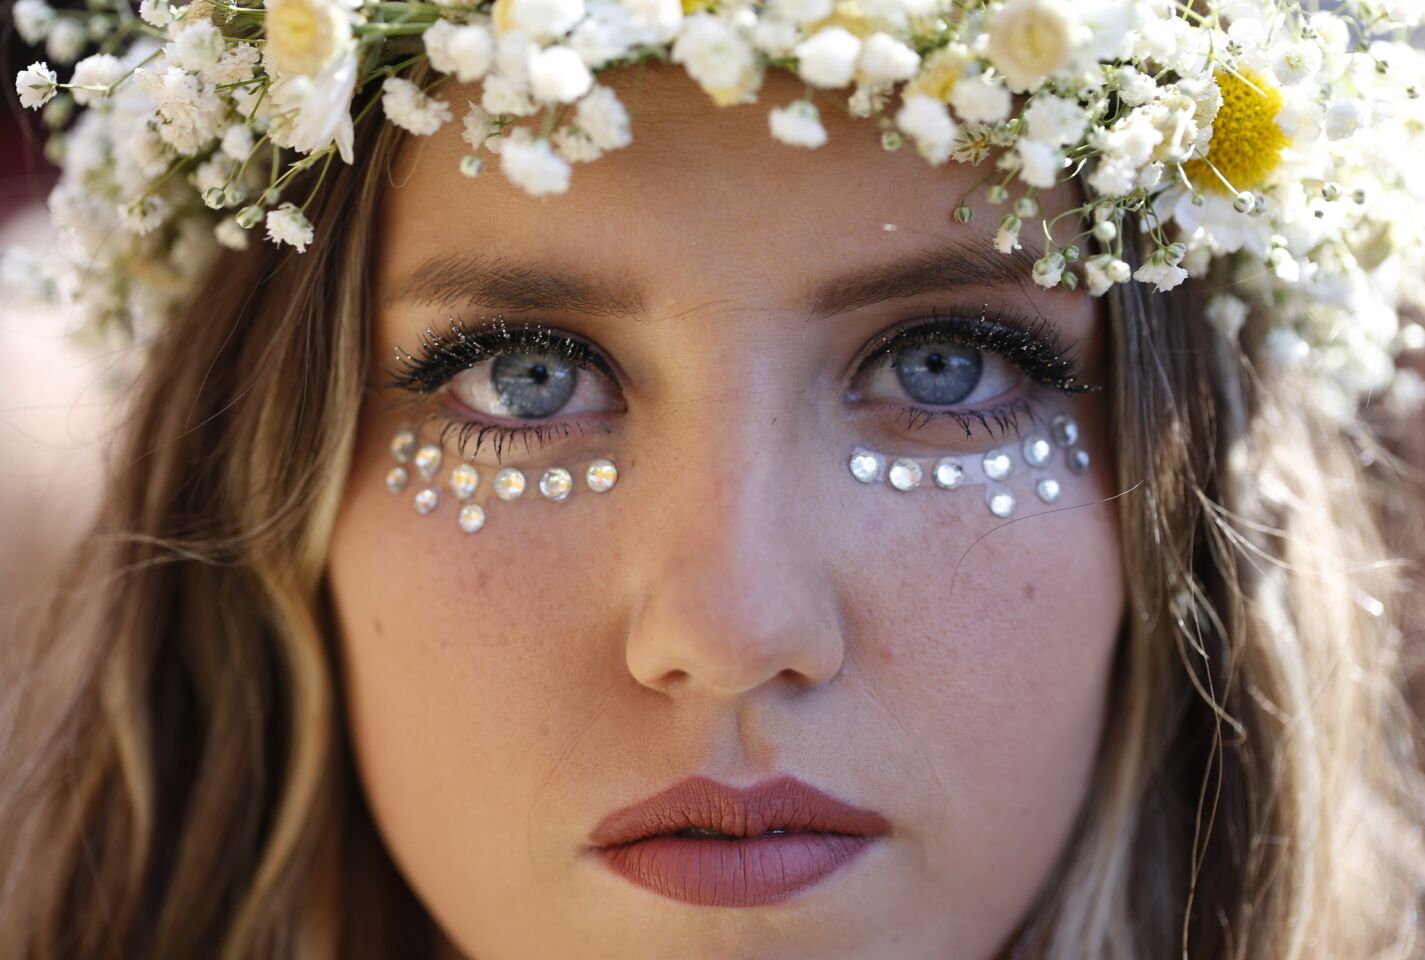 Clarissa Swikard, 18, of San Diego sports jewels and a flower crown to Day Three of the Coachella Valley Music and Arts Festival in Indio.